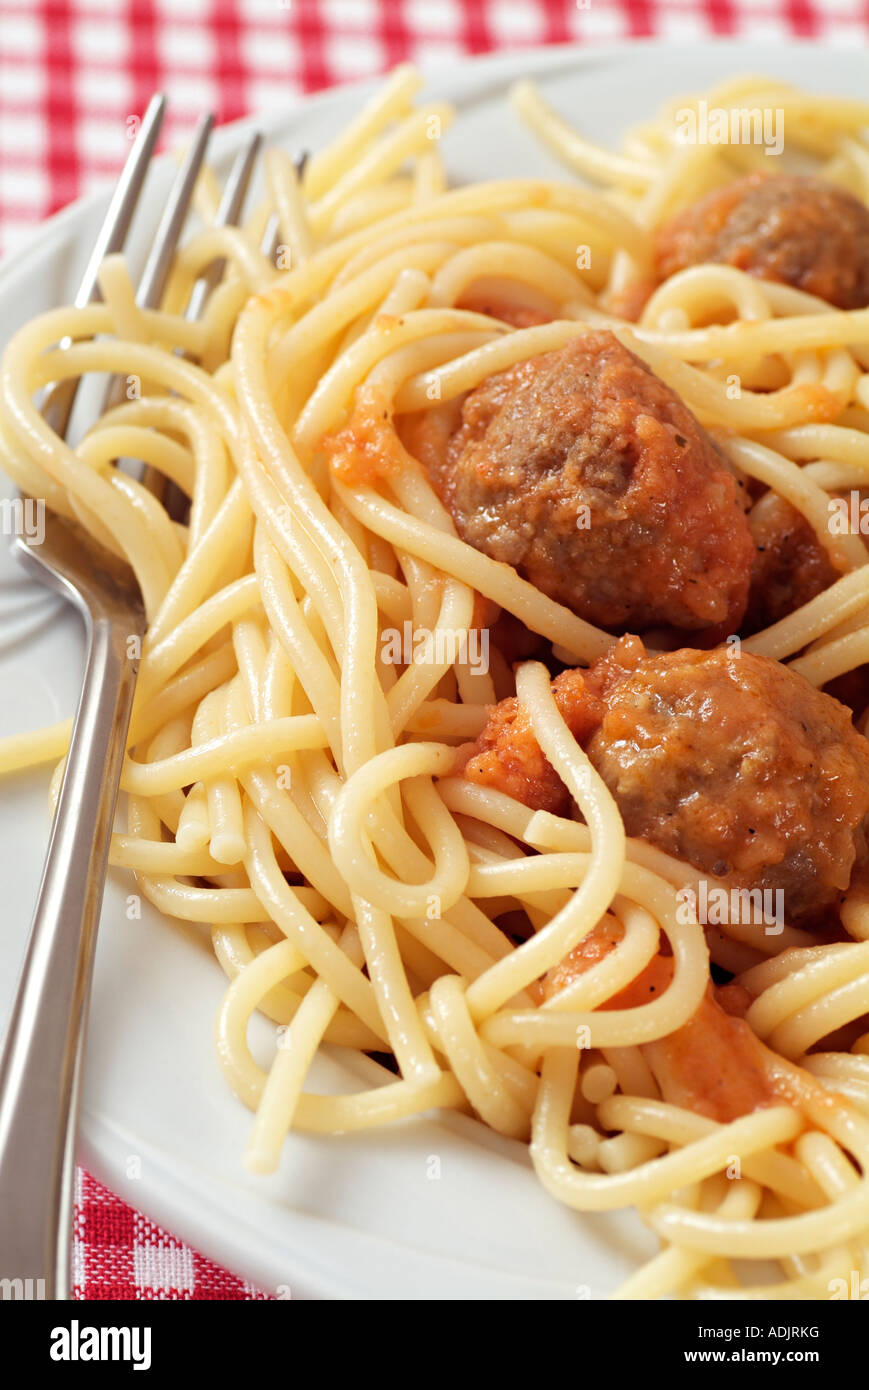 Spaghetti and Meatballs Traditional Italian Dish of Ground Beef Meatballs in a Sauce Served with Pasta Stock Photo